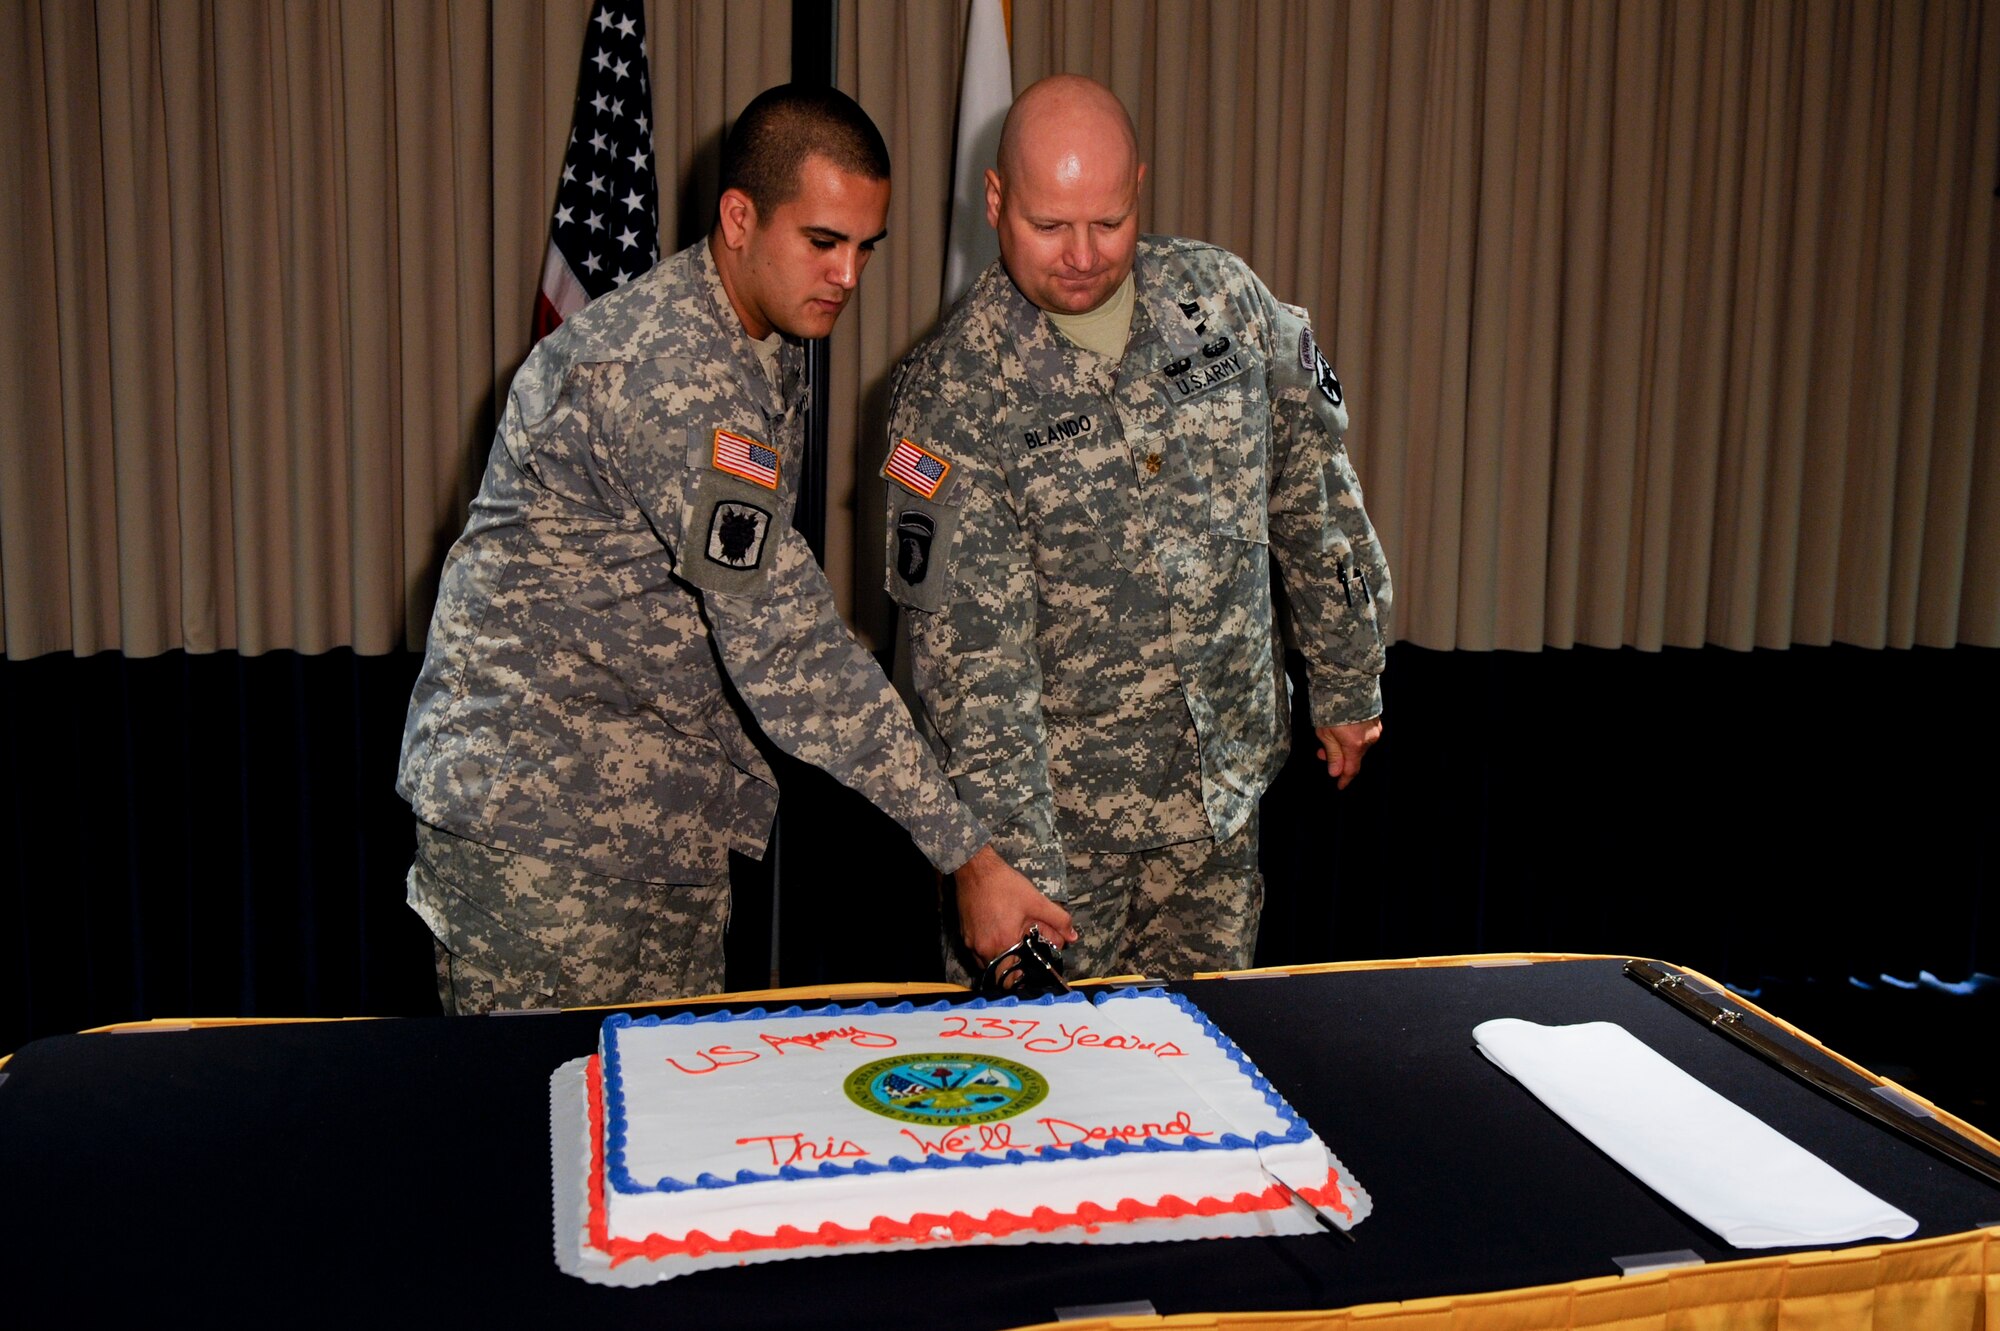 VANDENBERG AIR FORCE BASE, Calif. -- Army Sgt. Daniel Pineda, a Joint Space Operation Center space communications technician, and Maj. Craig Blando, a Joint Function Component Command Space plans officer, cut the cake during the 237th Army Birthday Celebration at the Pacific Coast Club here Thursday, June 14, 2012. Founded in 1775, the U.S. Army has grown from an amateur force of colonial freedom fighters to a professional force of more than one million solders fighting terrorism worldwide and providing support for international operations. (U.S. Air Force photo/Staff Sgt. Levi Riendeau)